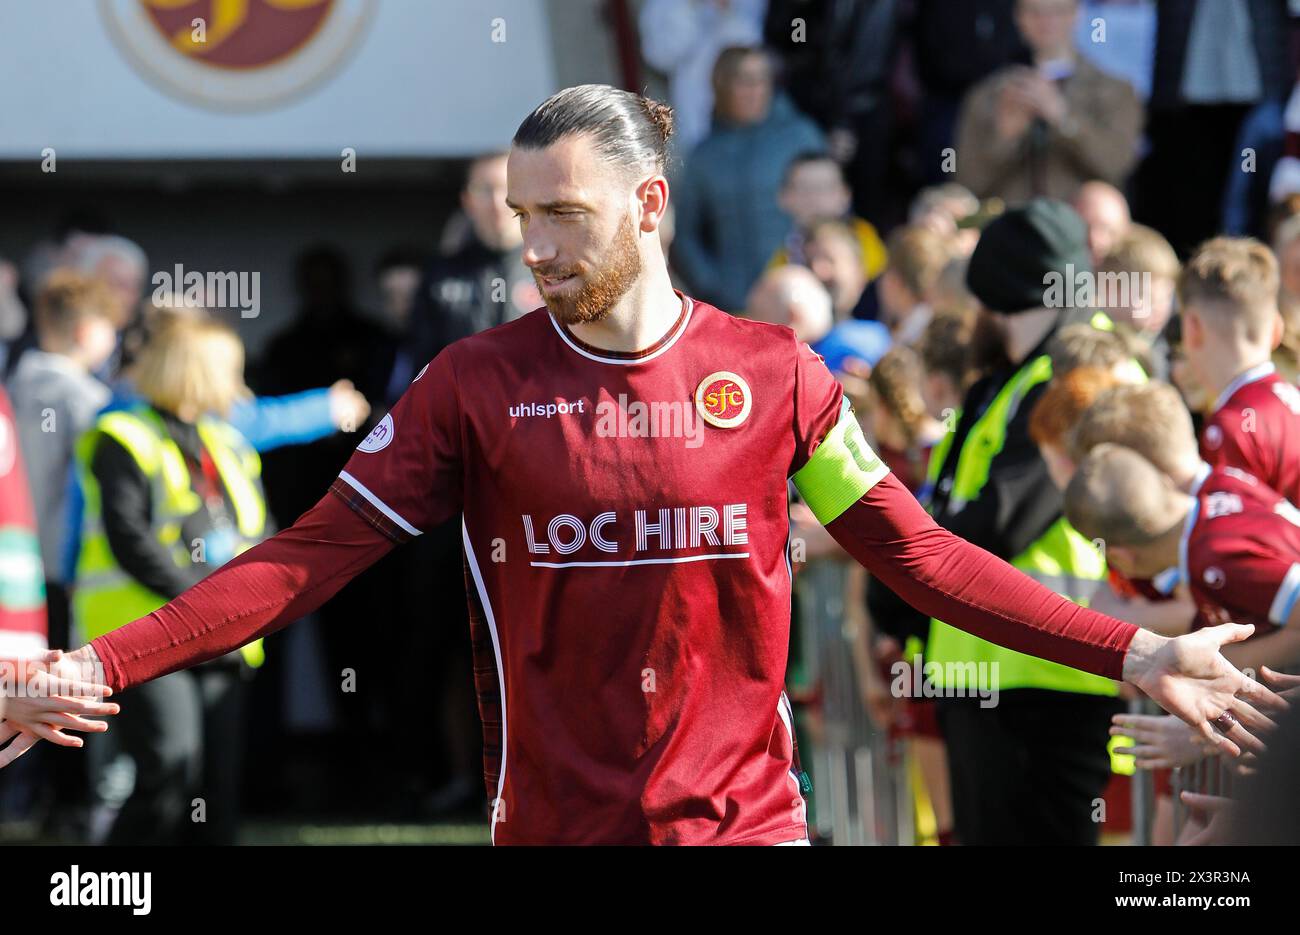 Stenhousemuir FC captain, Gregor Buchanan, heaps the praise of fans as he heads out to lift the Cinch Scottish League Two trophy at Ochilview Park, Stenhousemuir, This is the club's first league title they have won in their 140 year history. Credit: Thomas Gorman/Alamy Live News Stock Photo